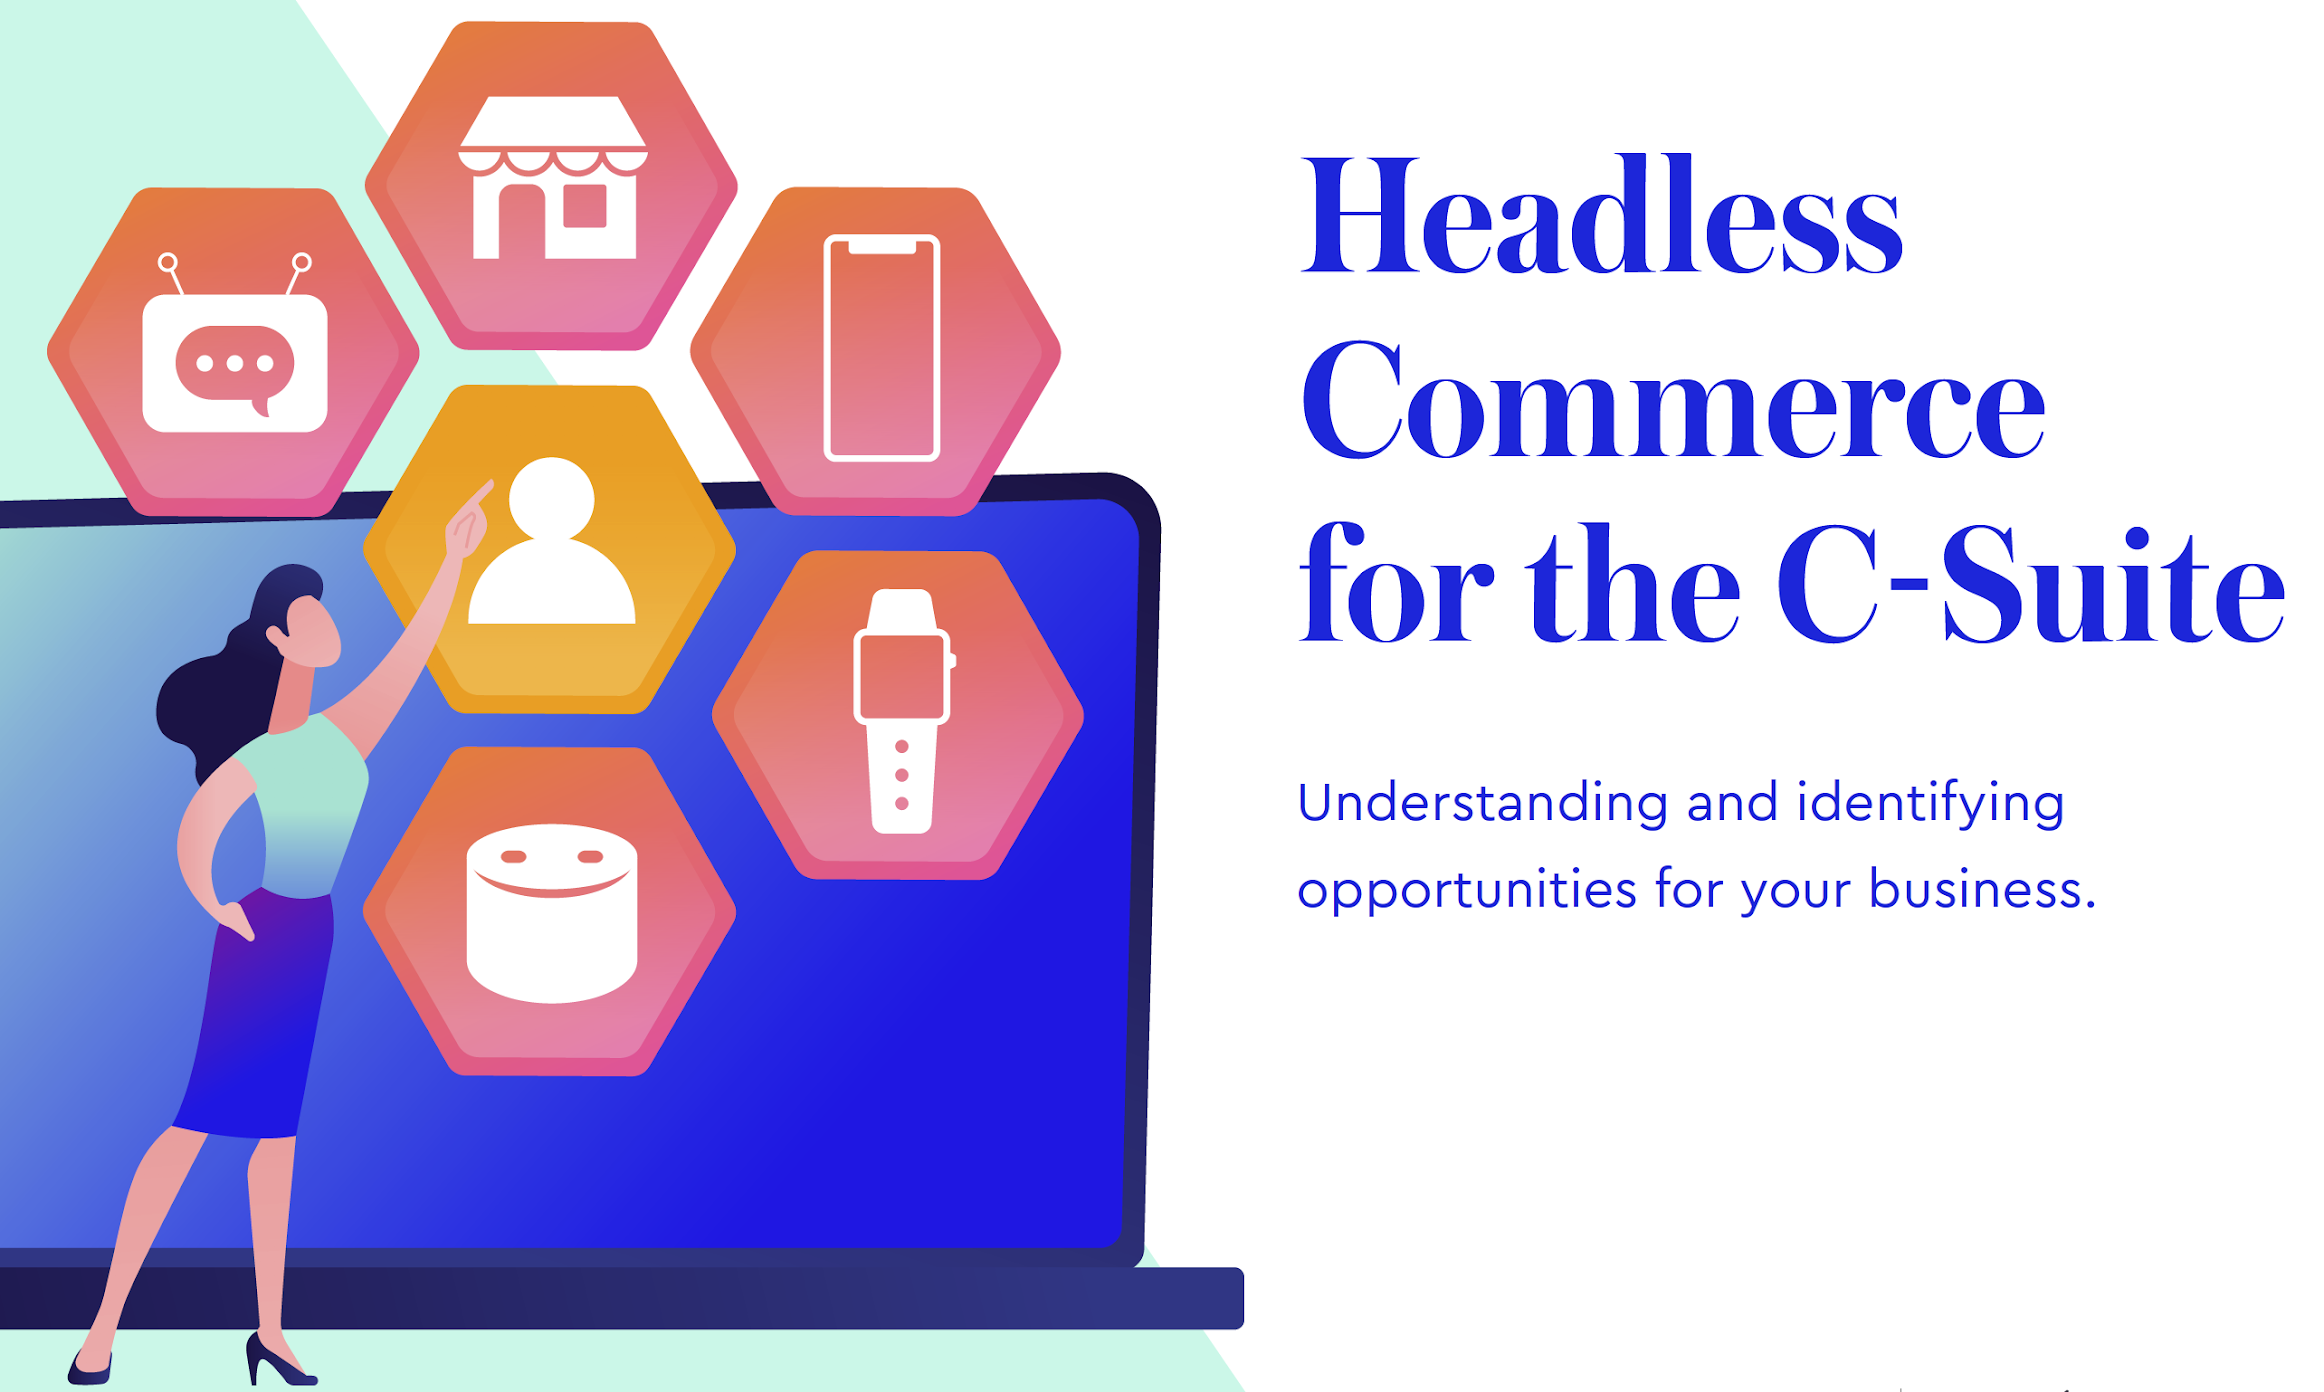 Learn Why and How Headless Commerce Improve Business Outcomes